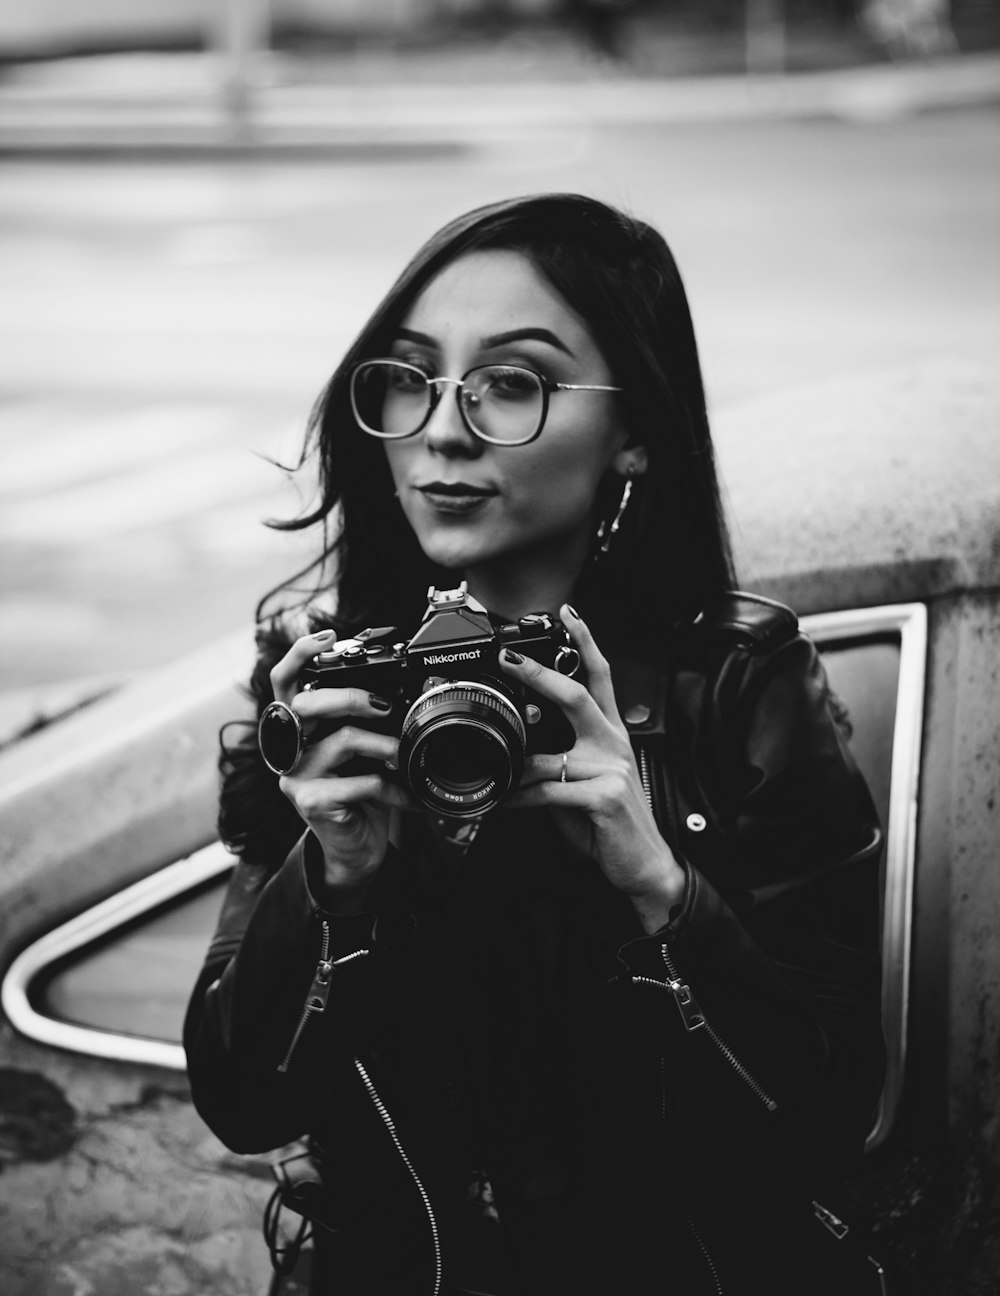 woman in black jacket holding camera